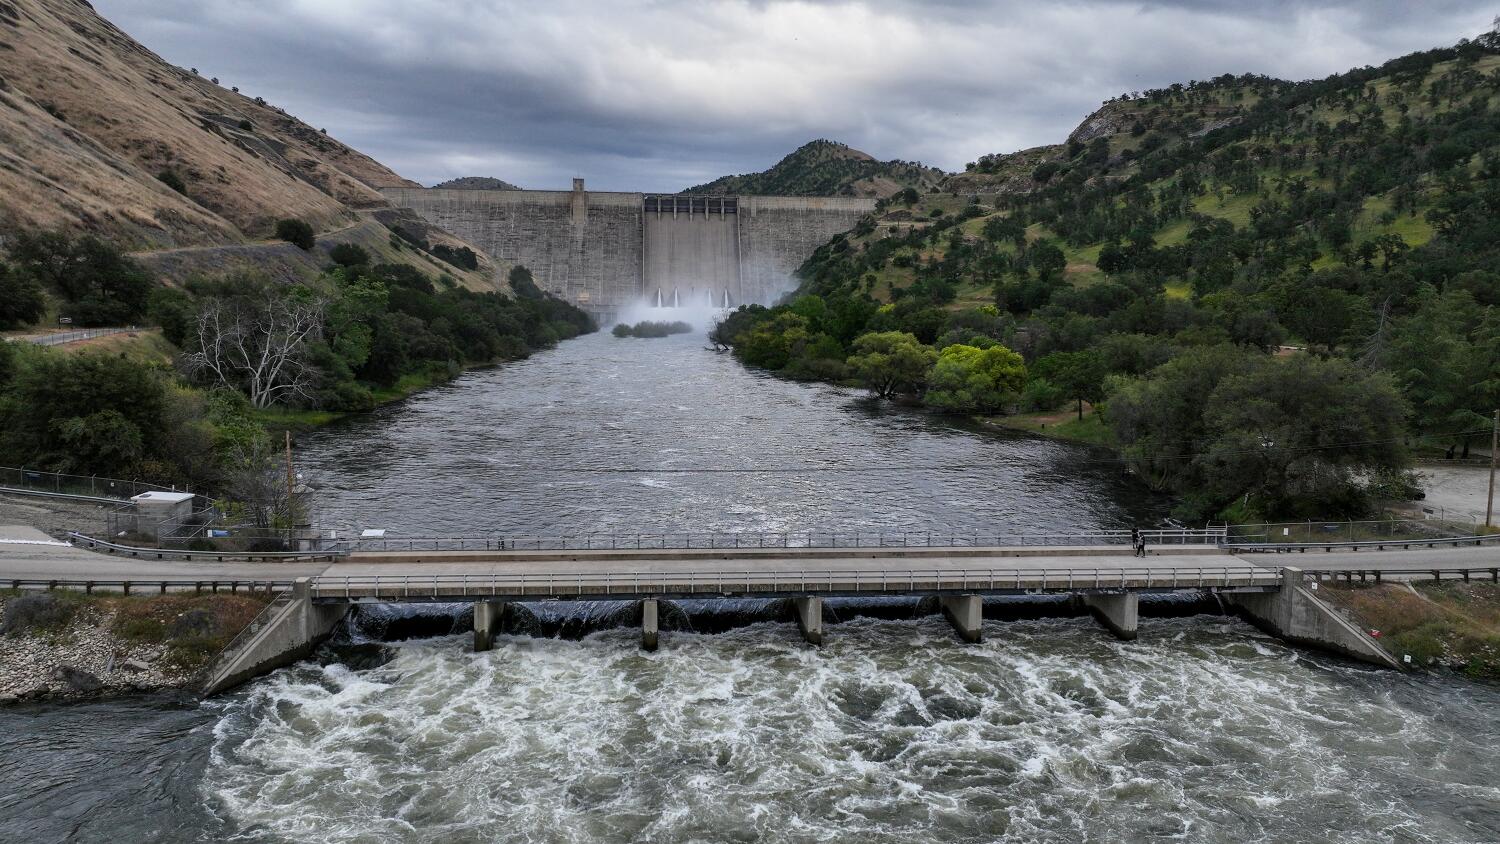 Only 8% of California rivers and streams have gauges measuring flow, study finds